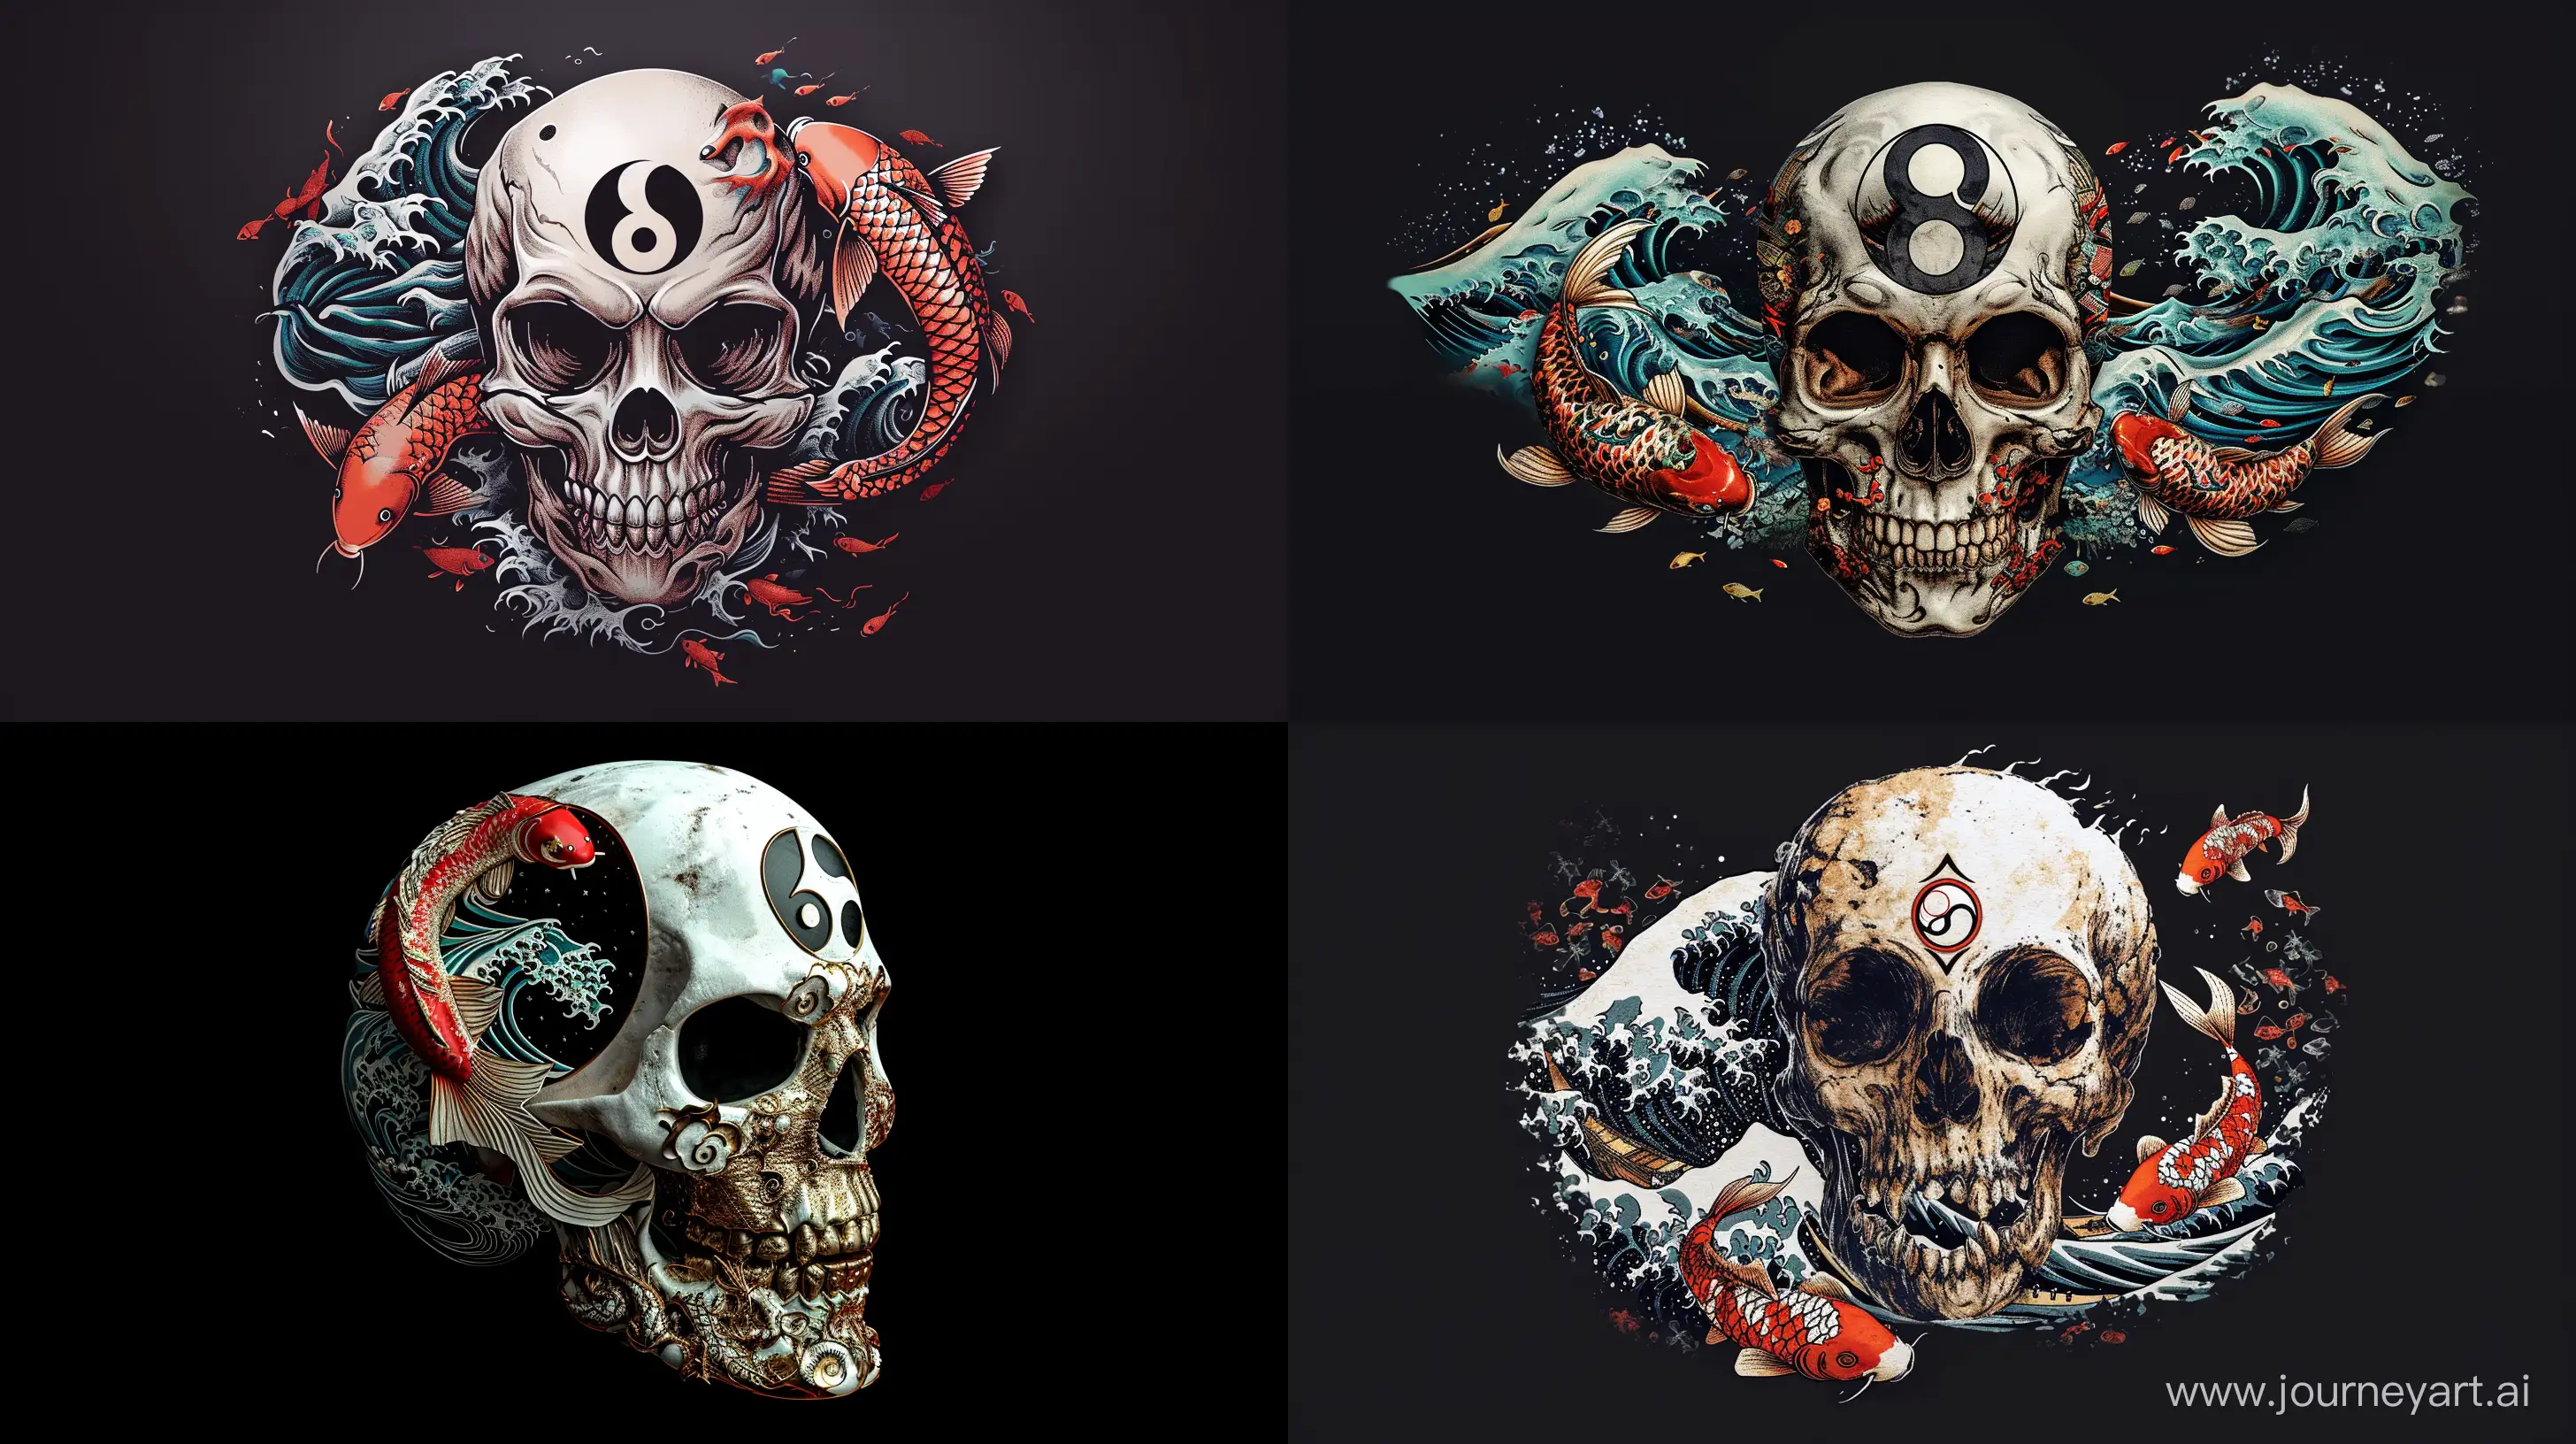  japanese demon skull that is japanese style such as wave, koi fish, ying yang, with black background in 4k --v 6.0 --ar 16:9
